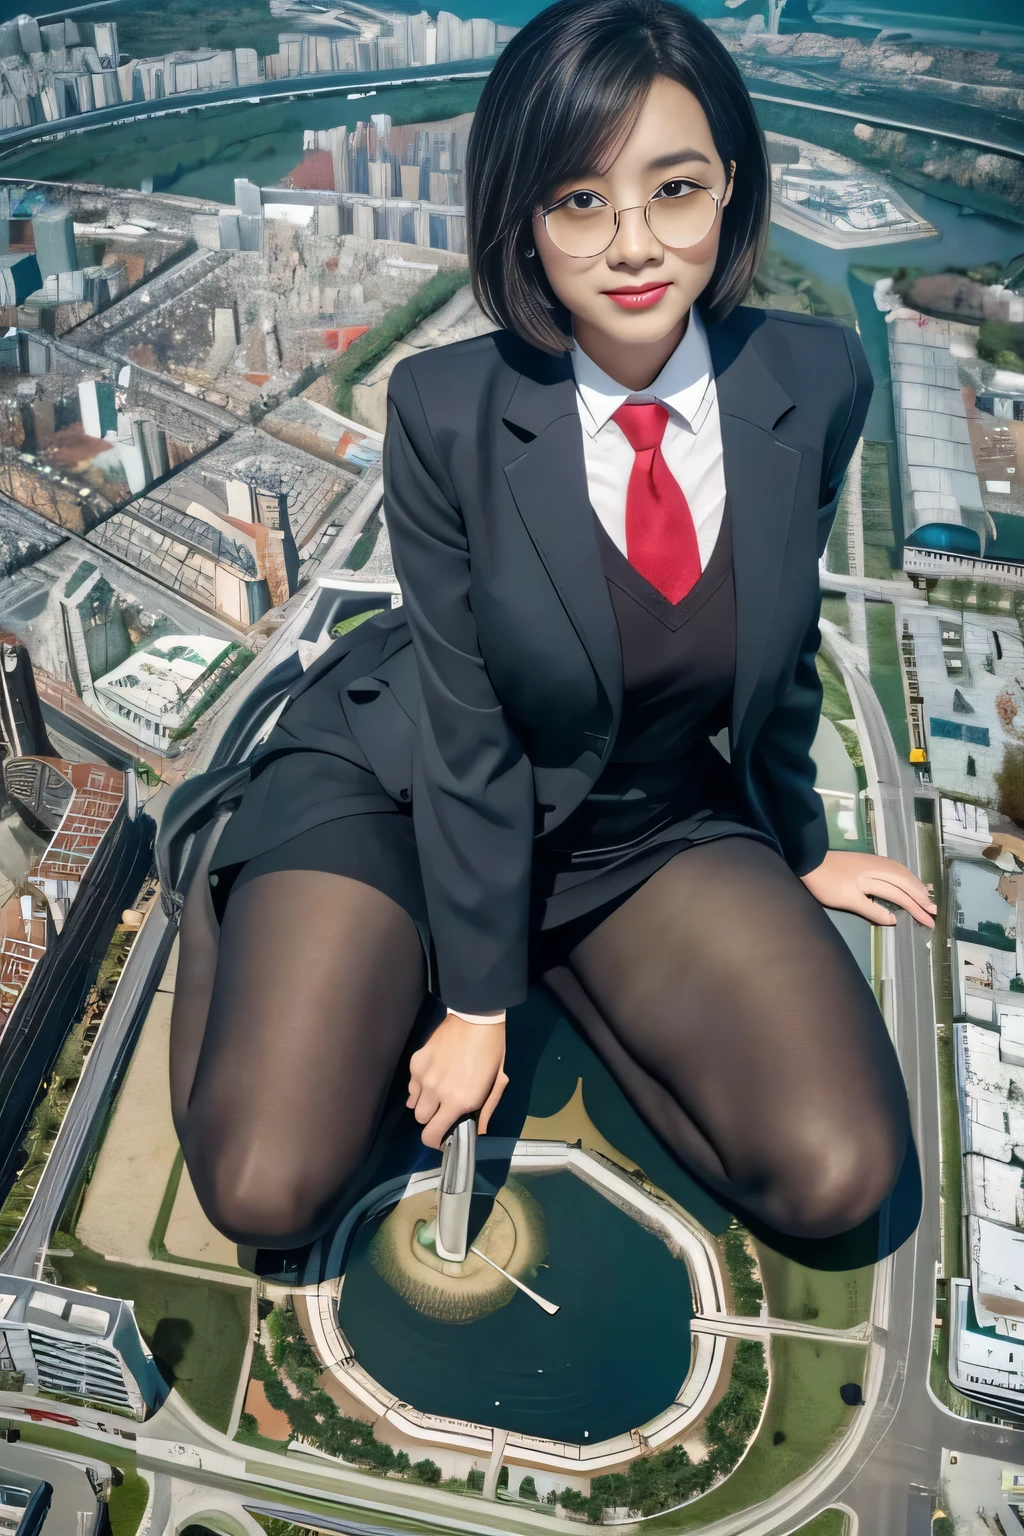 giantess art, a hyperrealistic schoolgirl, 非常に詳細なthe giantショット, the giant, Shorthair, Black pantyhose, gigantic 、&#39;tome&#39;It&#39;s much bigger than a skyscraper, Wearing rimless glasses, Colossal , Navy blue blazer, Red tie, Mini Length Skirt, Black pantyhose, I'm not wearing shoes., very small metropolis, miniature metropolis, A miniature metropolis that is only up to your feet.、squatting and urinating, The city is a sea of urine, tsunami of urine, Small trains and cars washed away with urine., Full body depiction, nffsw, giga giants, Black pantyhose, Pantyhose legs, Pantyhose legs, ,Stomping City,crash city,Small town,micro city, Peeing,